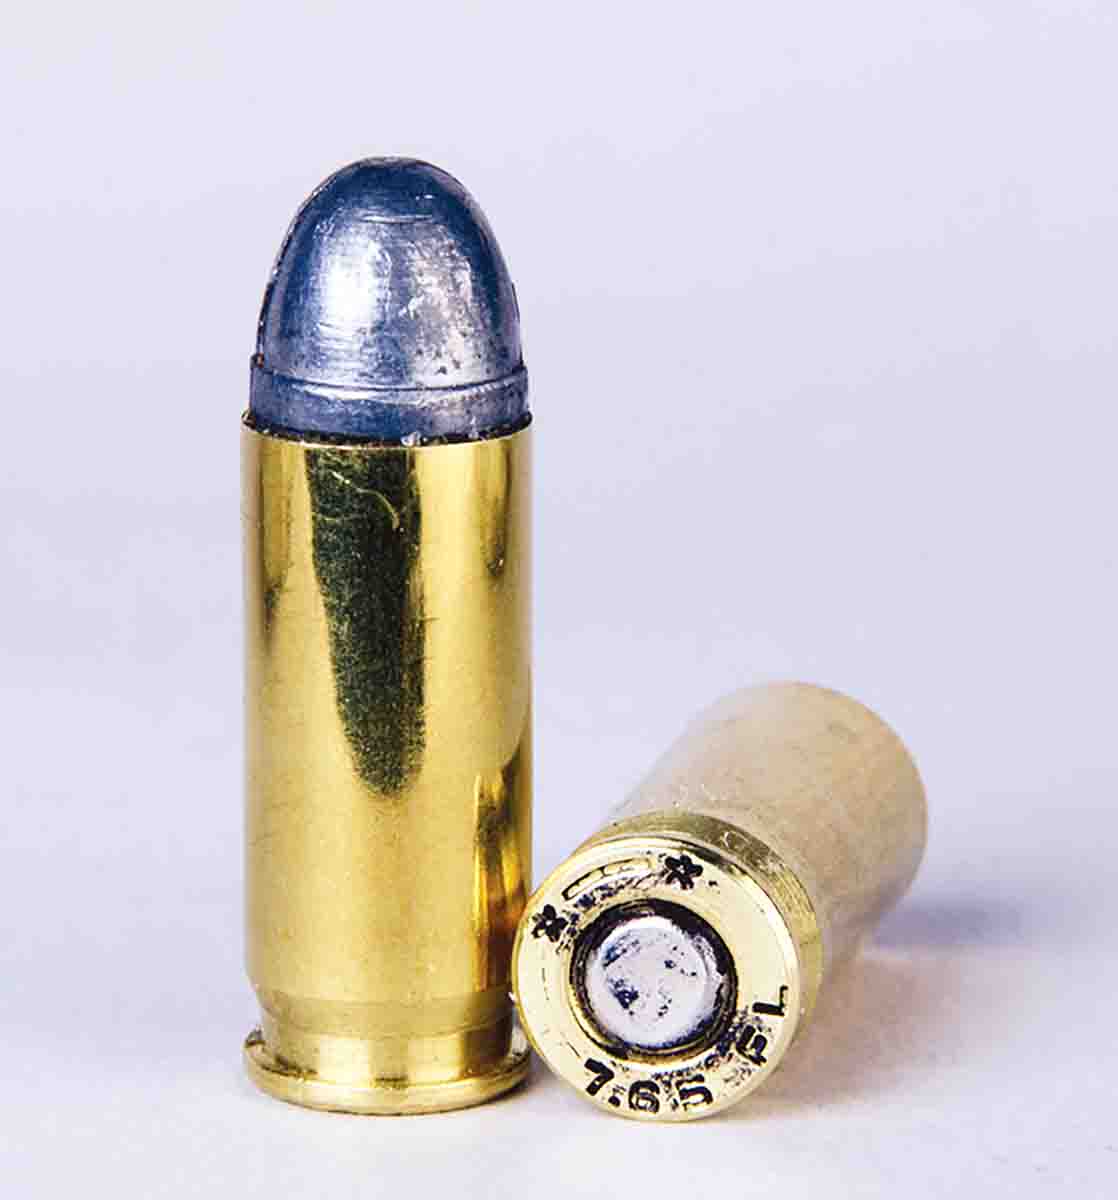 Cartridge cases for the 7.65mm French Long are now available from Starline. Mike’s handloads used 84-grain RN bullets from a discontinued RCBS mould 32-84-RN.